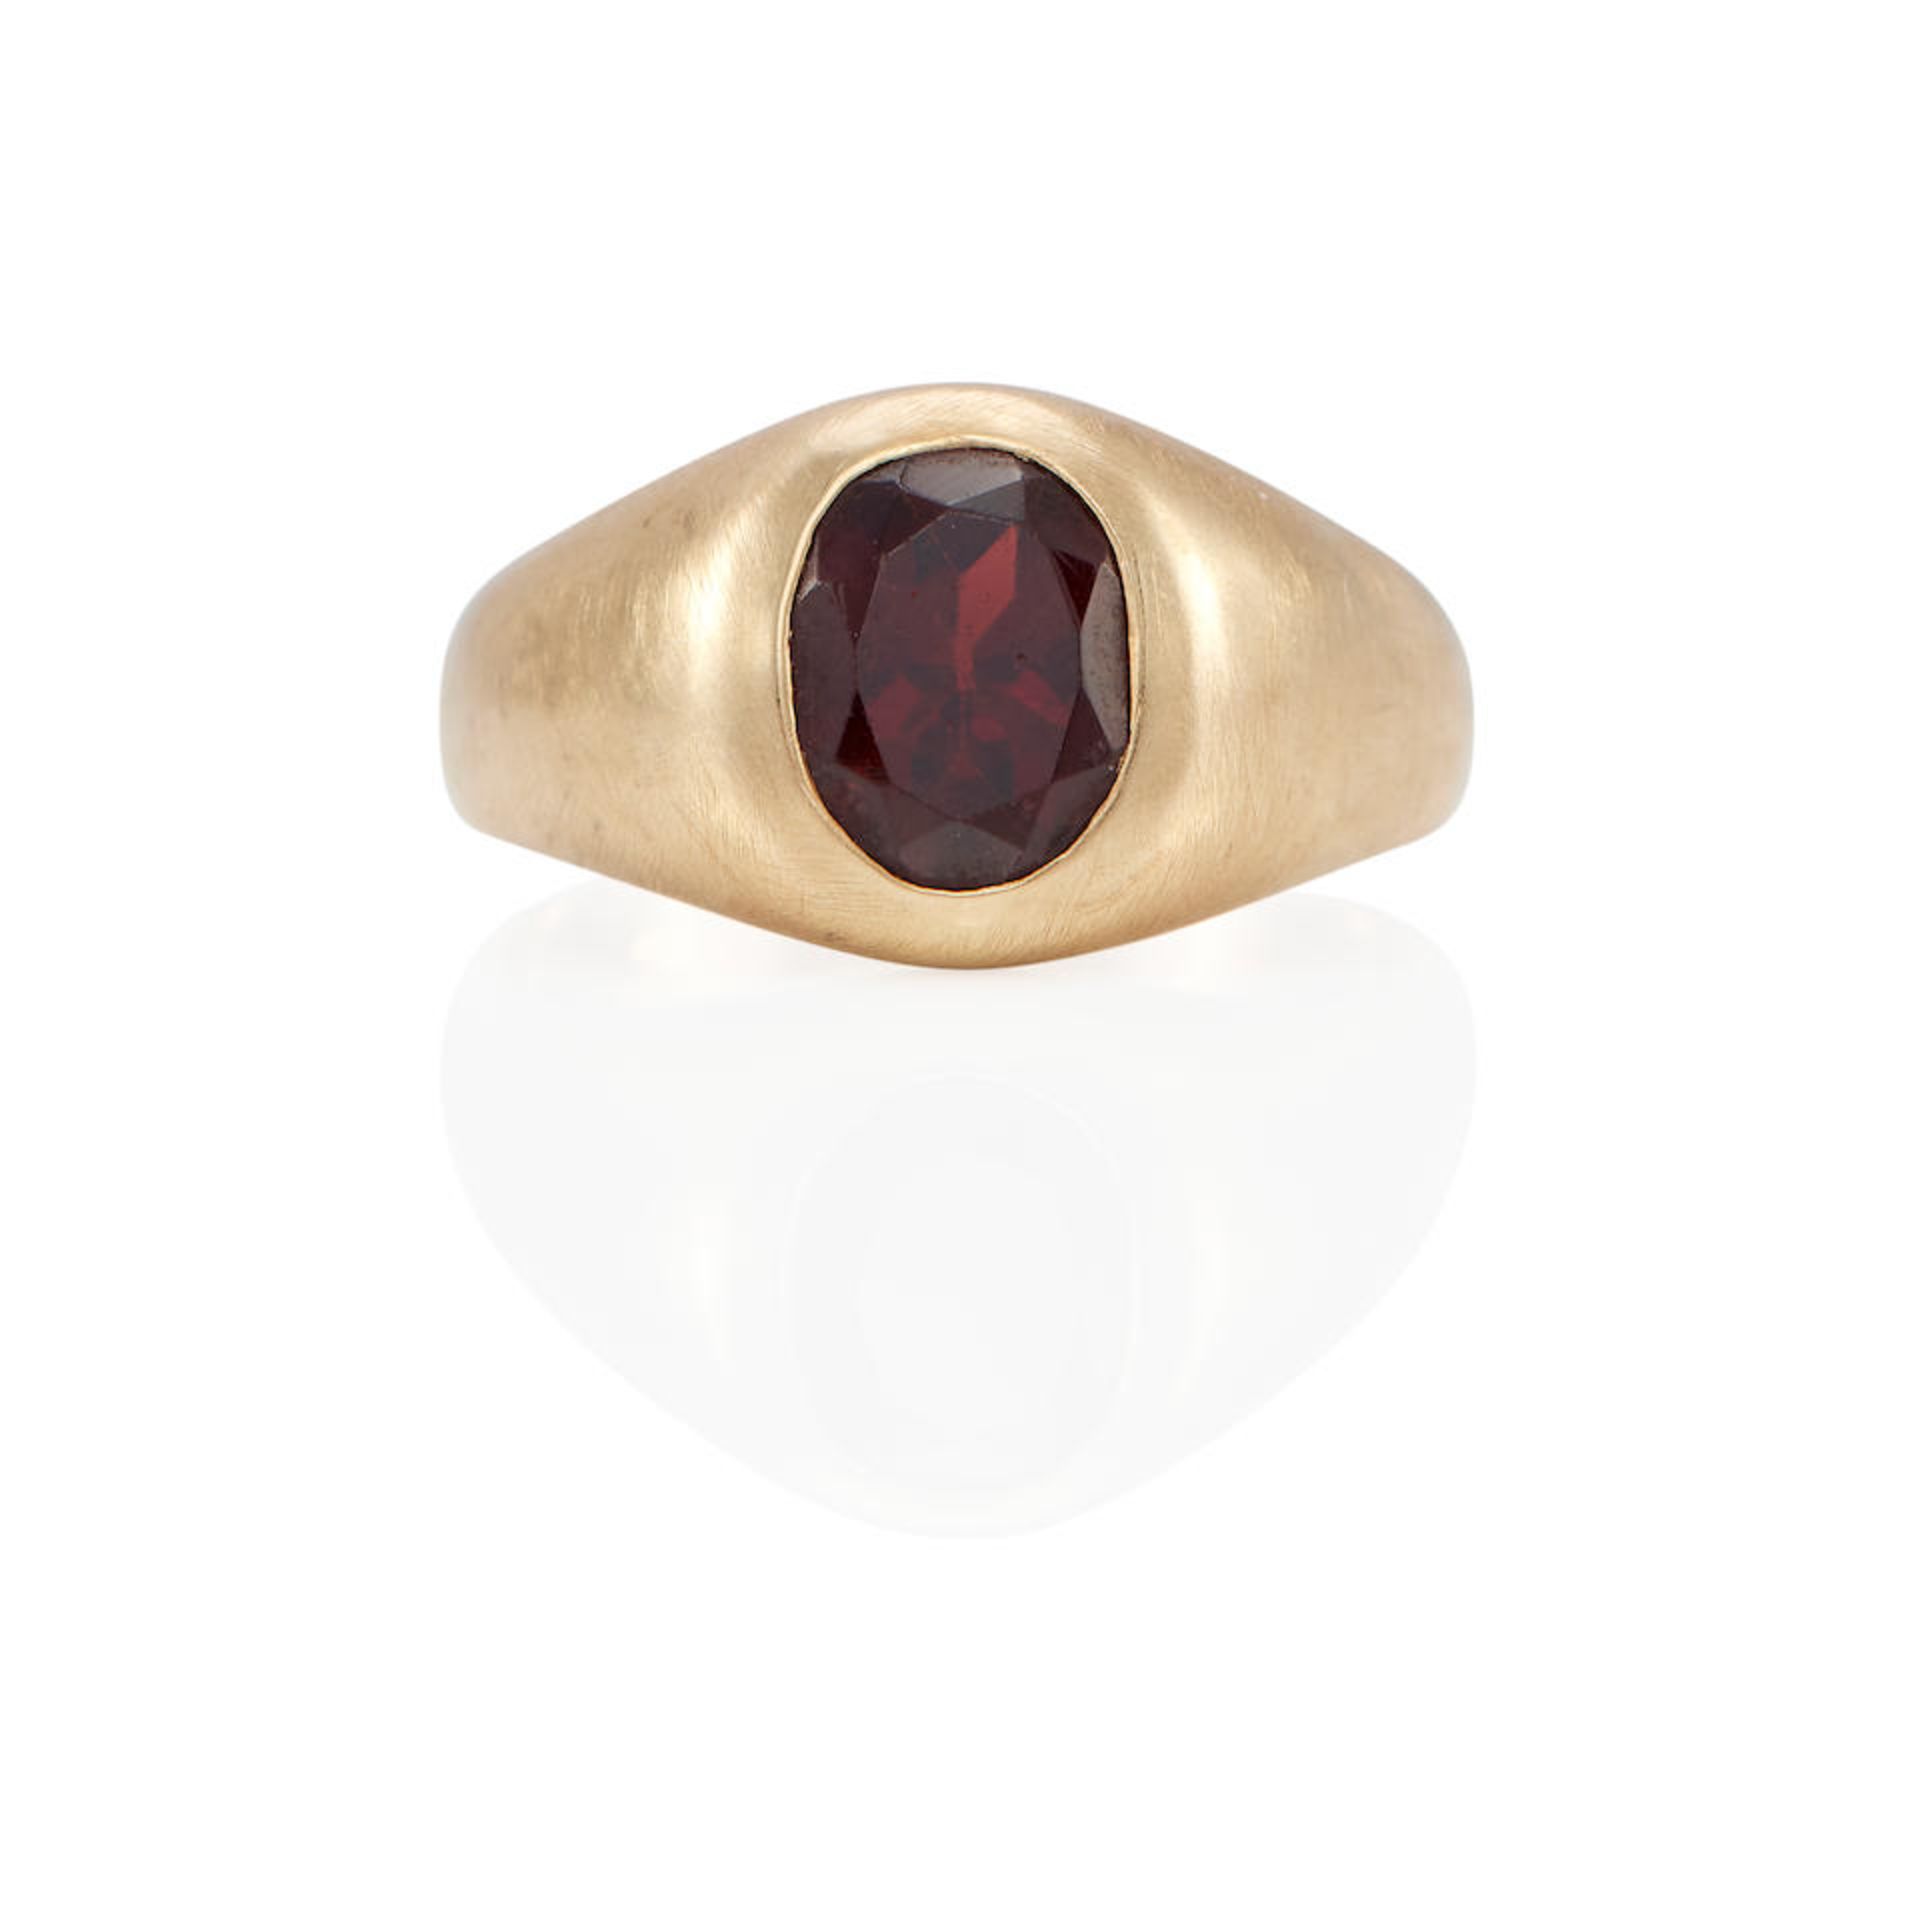 A 10K GOLD AND GARNET RING